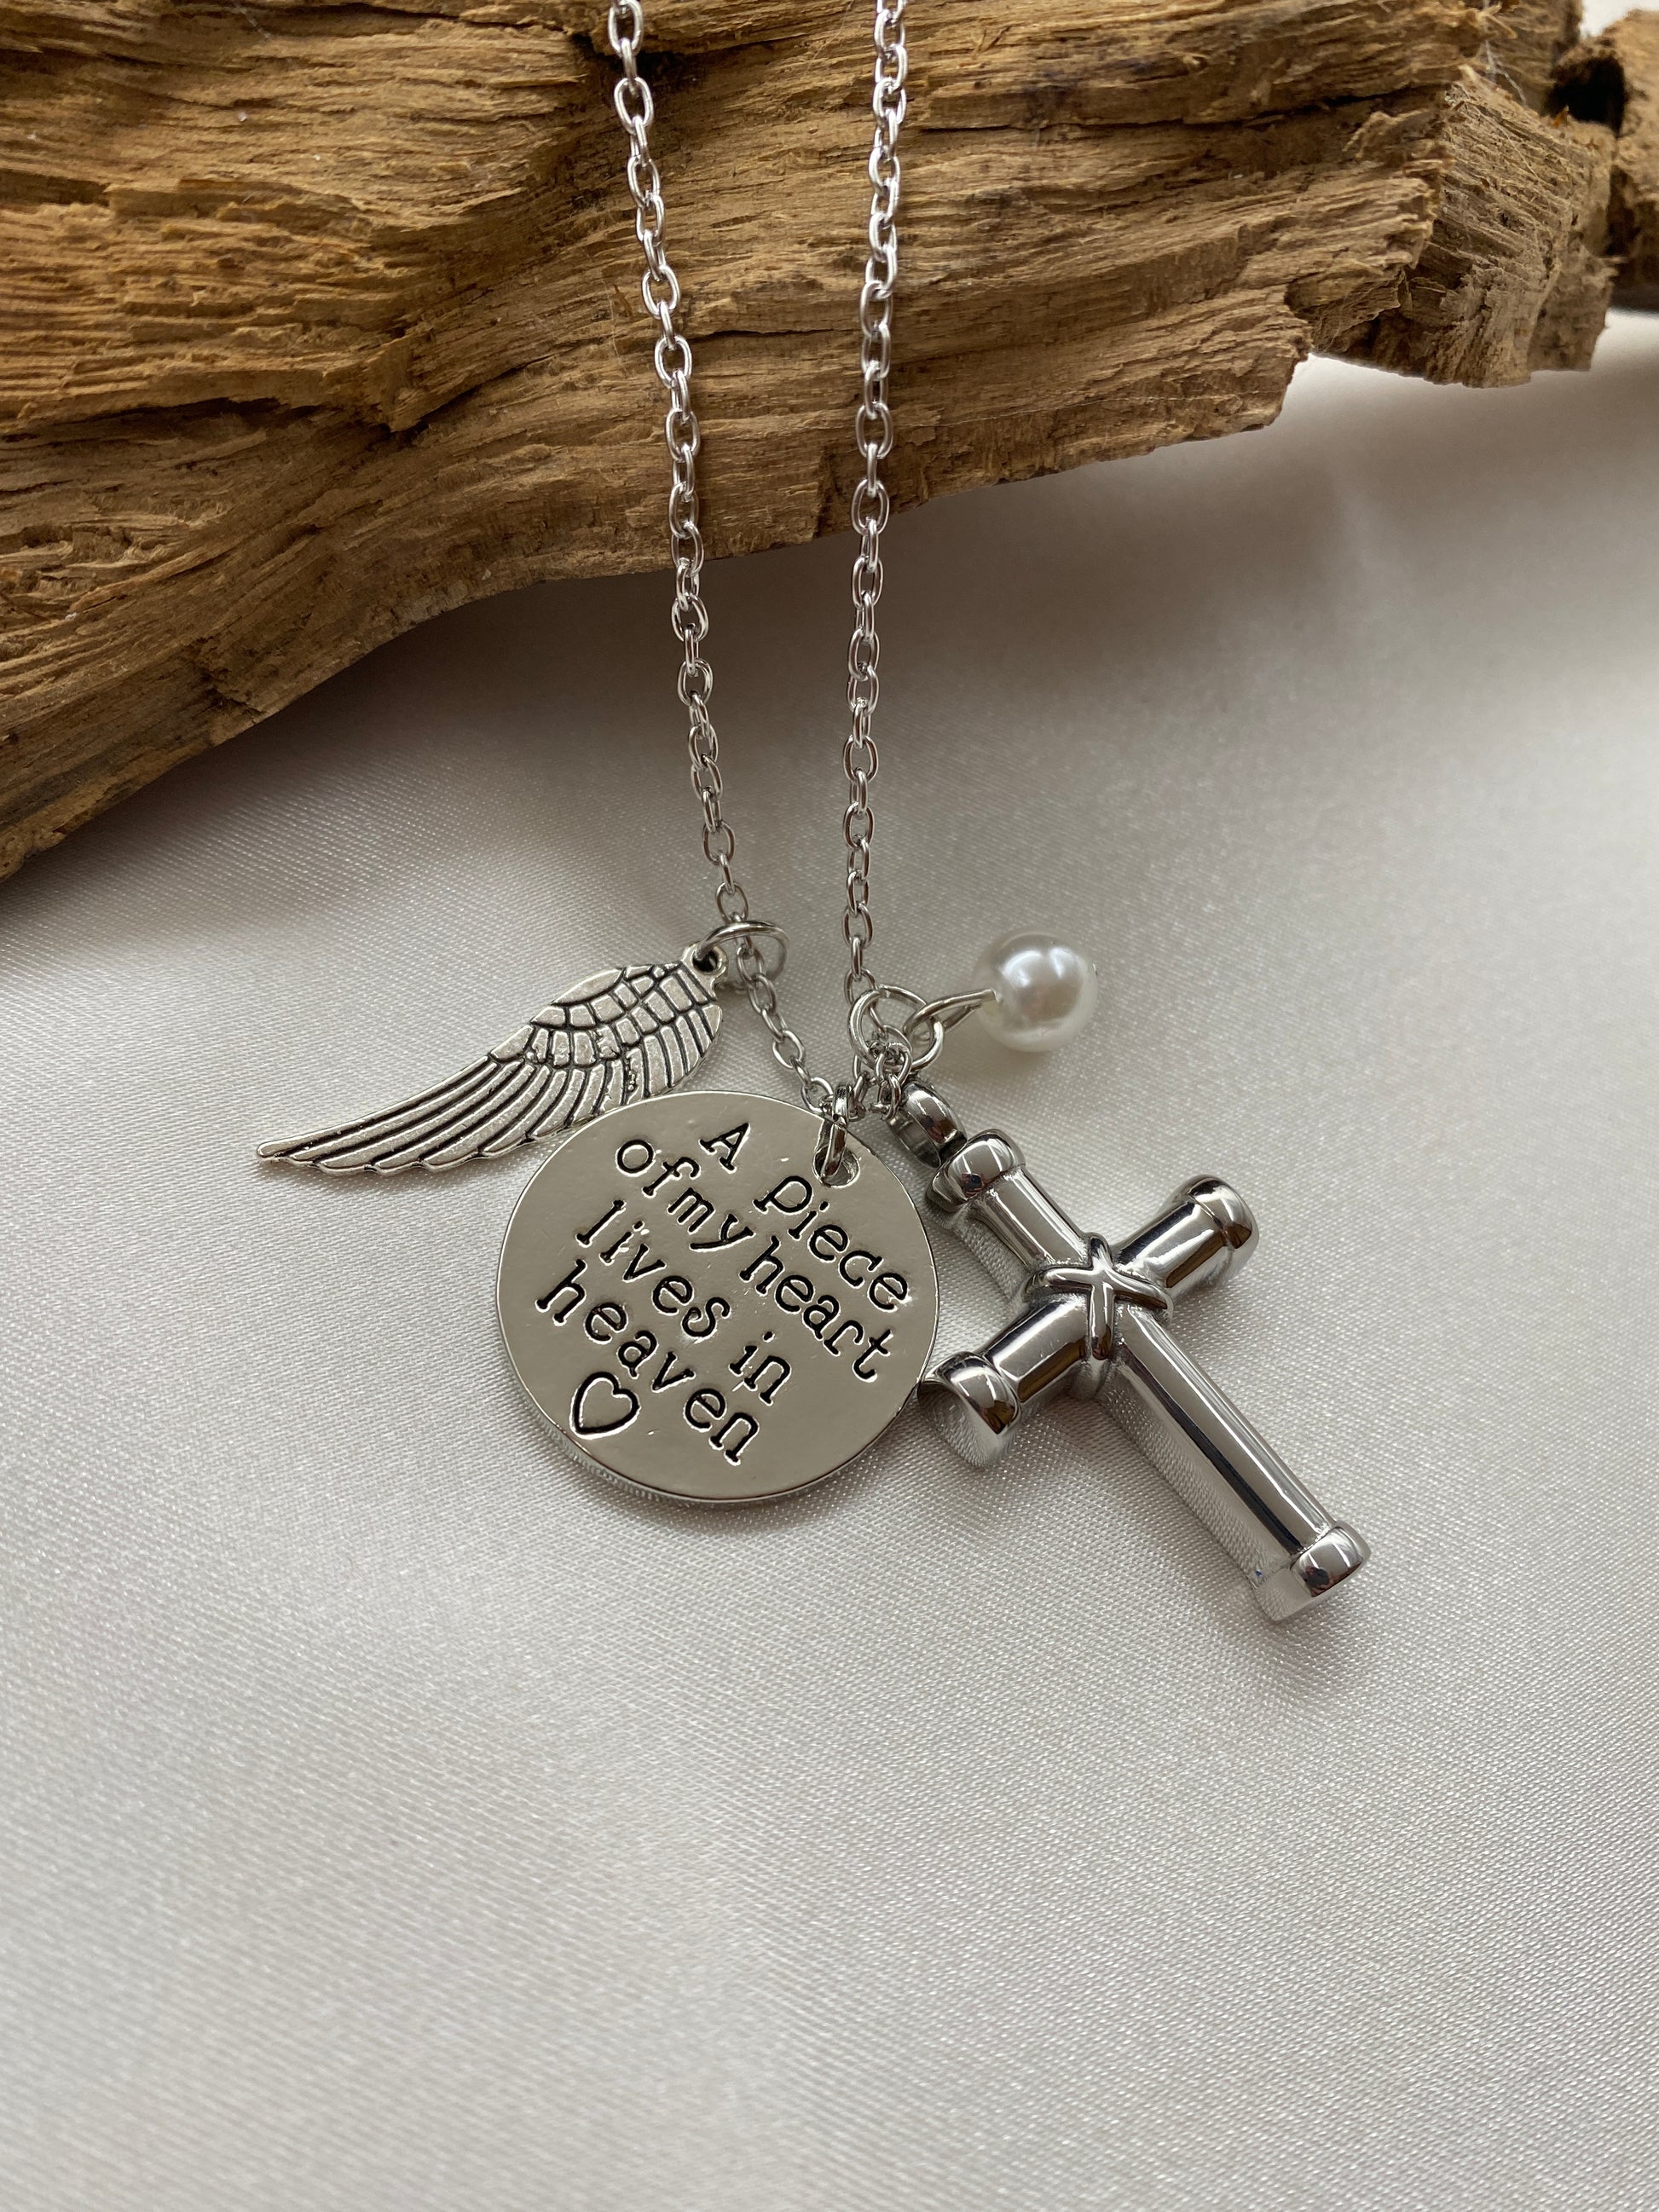 Cremation cross with Angel wing, pearl and inspirational charm